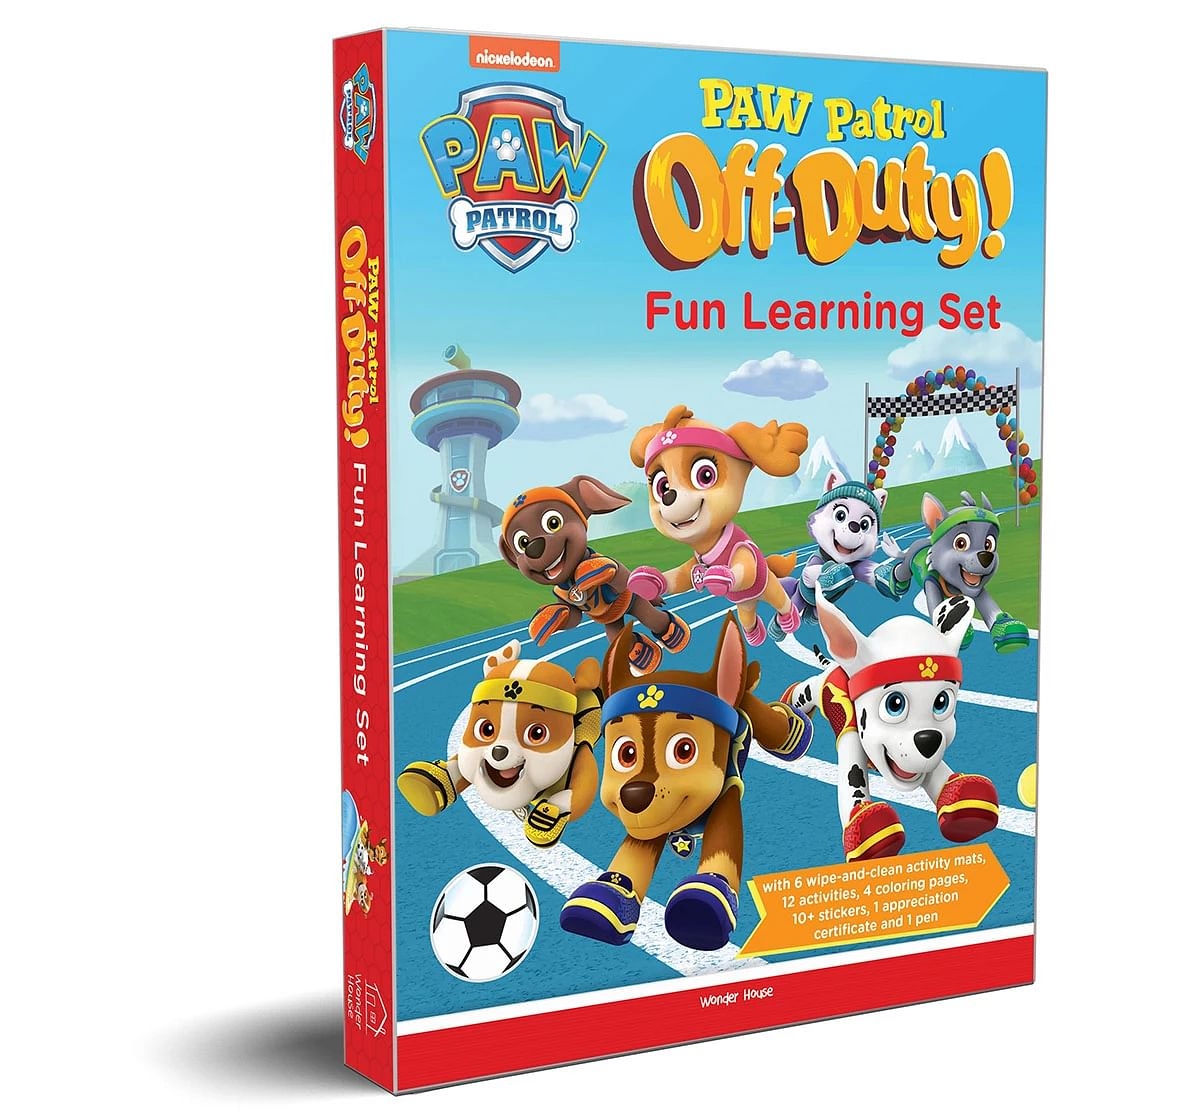 Wonder House Books Nickelodeon Paw Patrol Super Pup Heroes off Duty Fun Learning  Activity Set for kids 3Y+, Multicolour